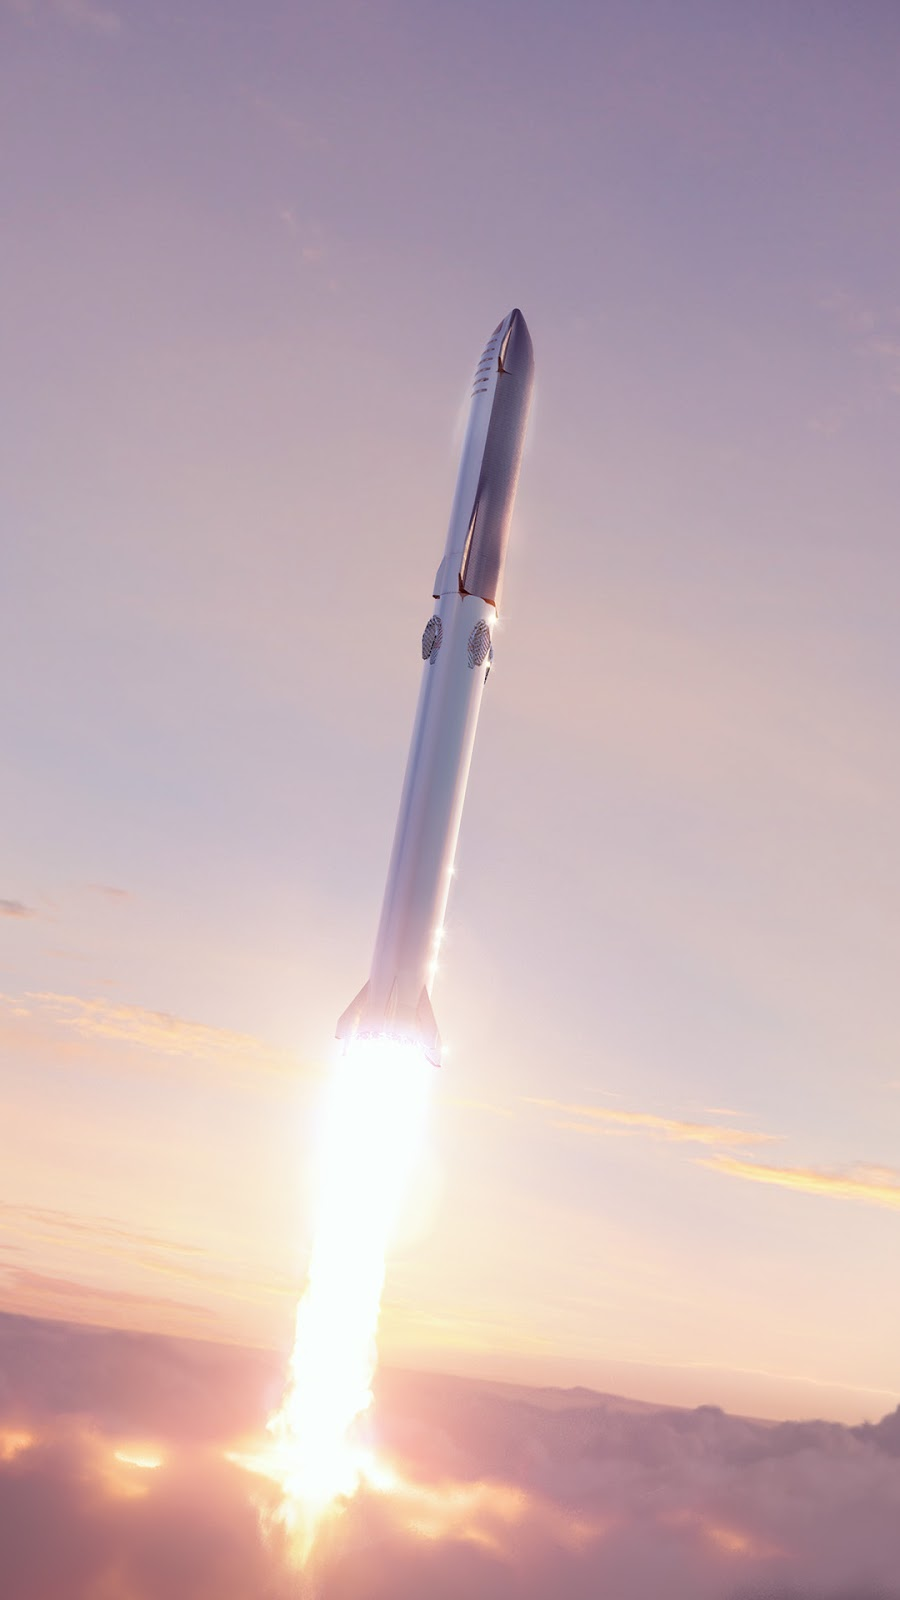 Wallpaper of SpaceX new Starship Super Heavy launch. Spacex, Spacex starship, Starship